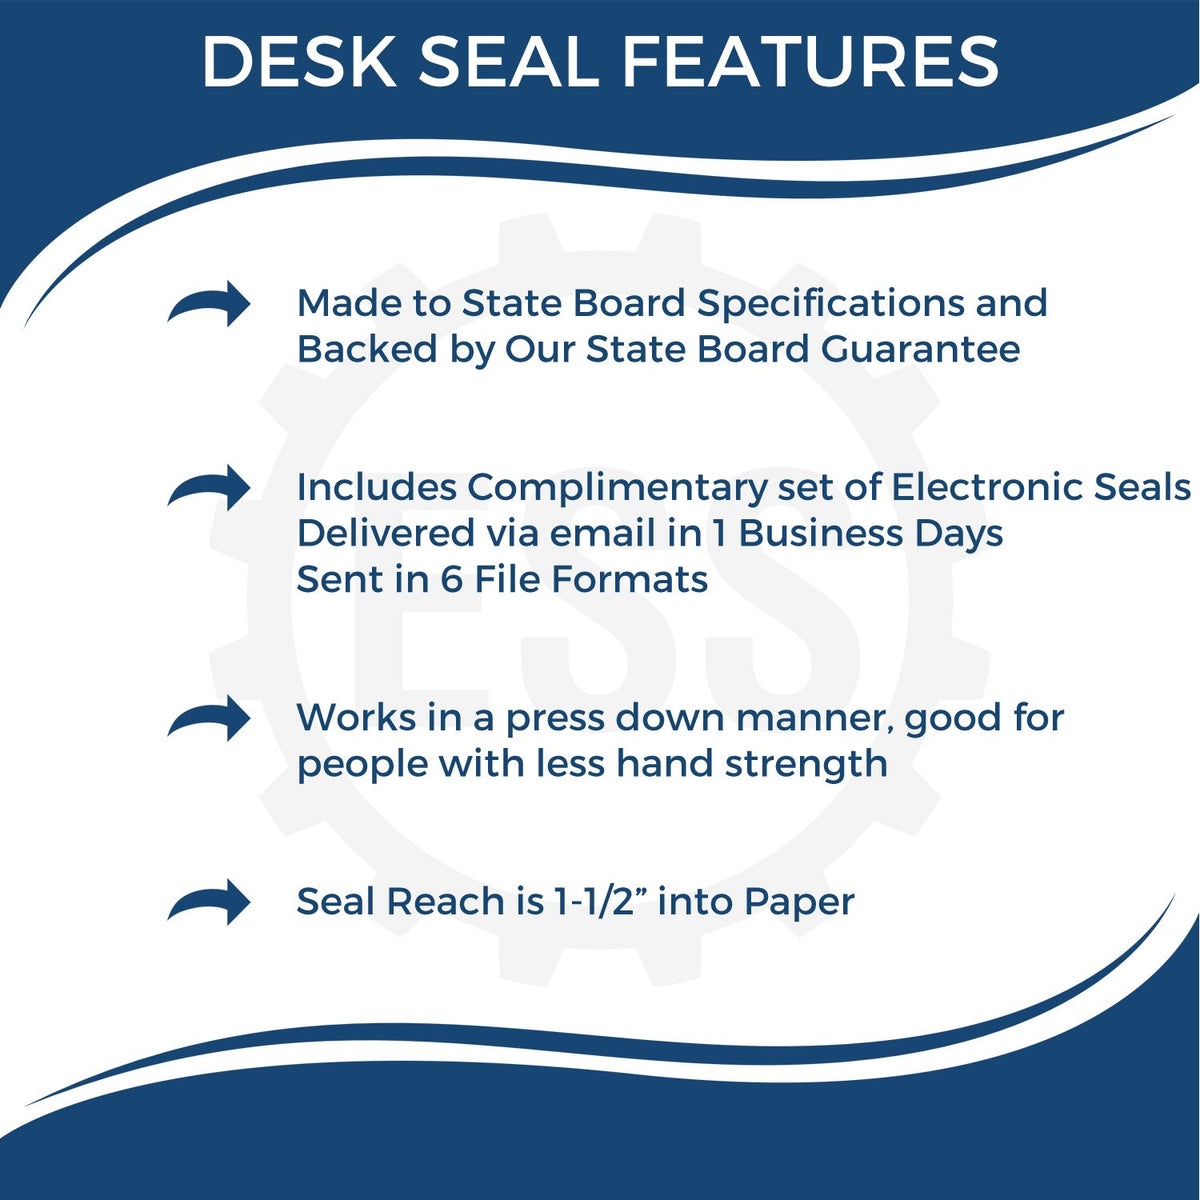 A picture of an infographic highlighting the selling points for the South Dakota Desk Architect Embossing Seal